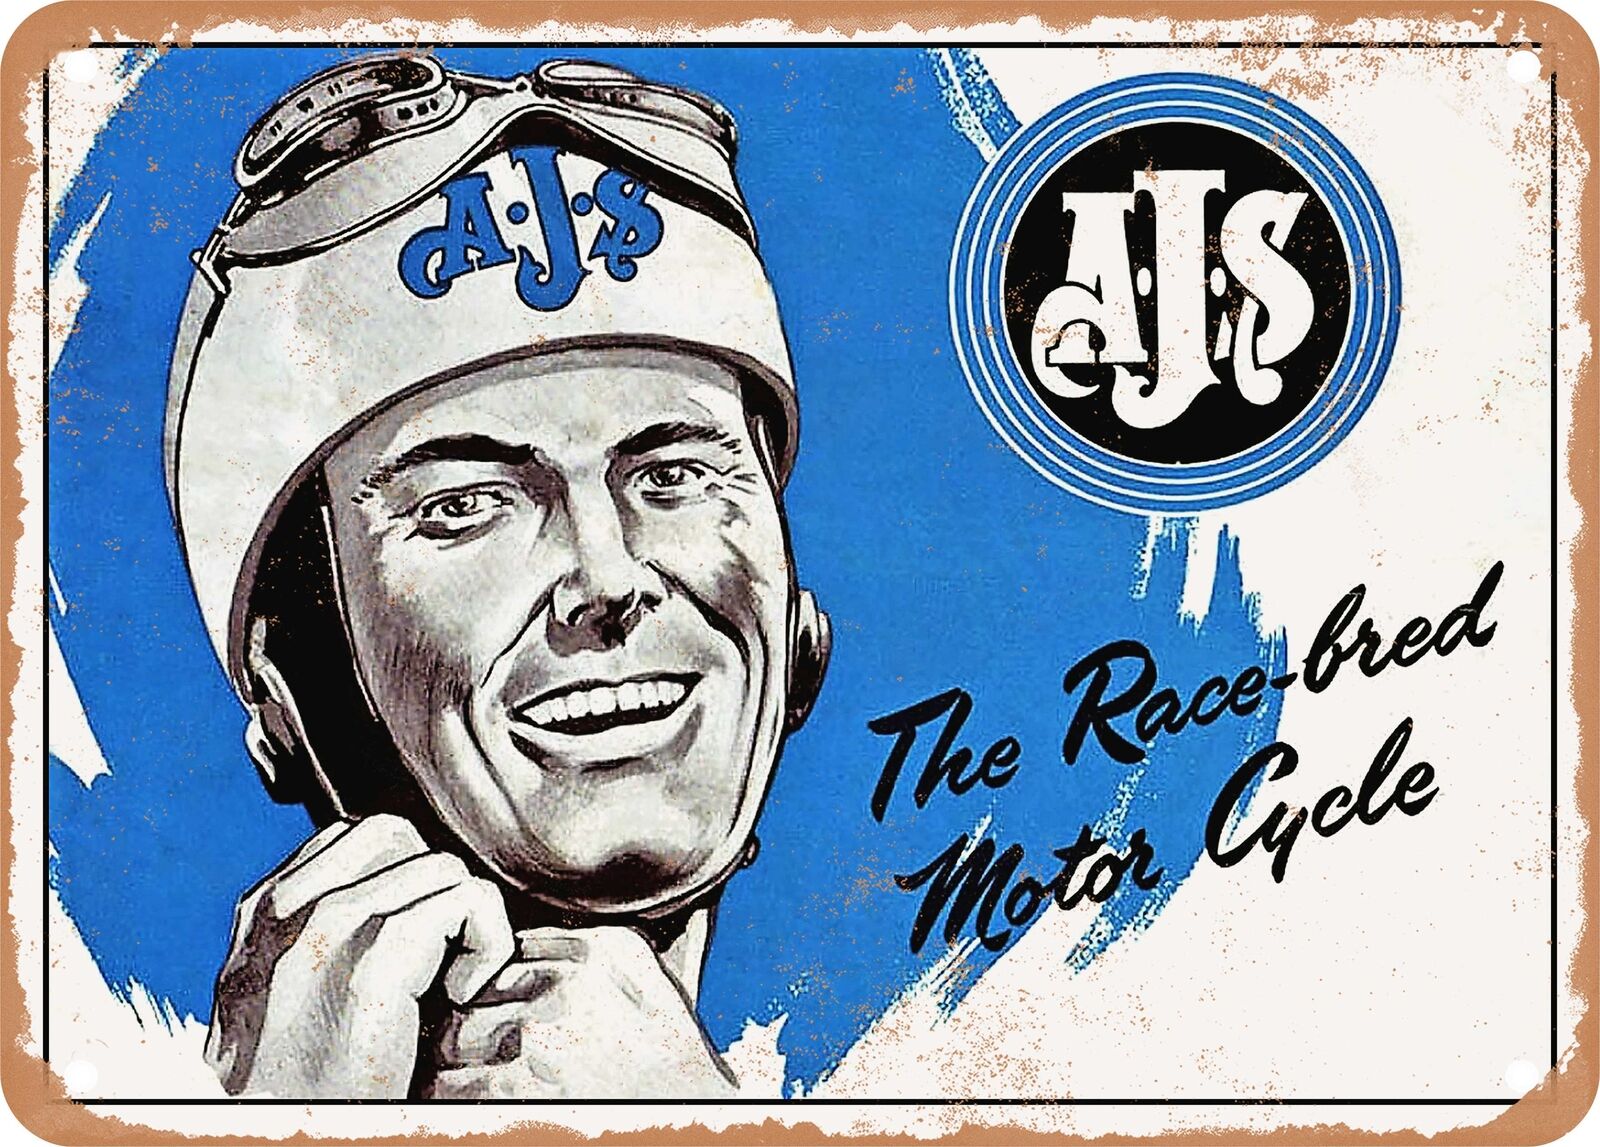 METAL SIGN - 1957 AJs the Race Bred Motorcycle Vintage Ad